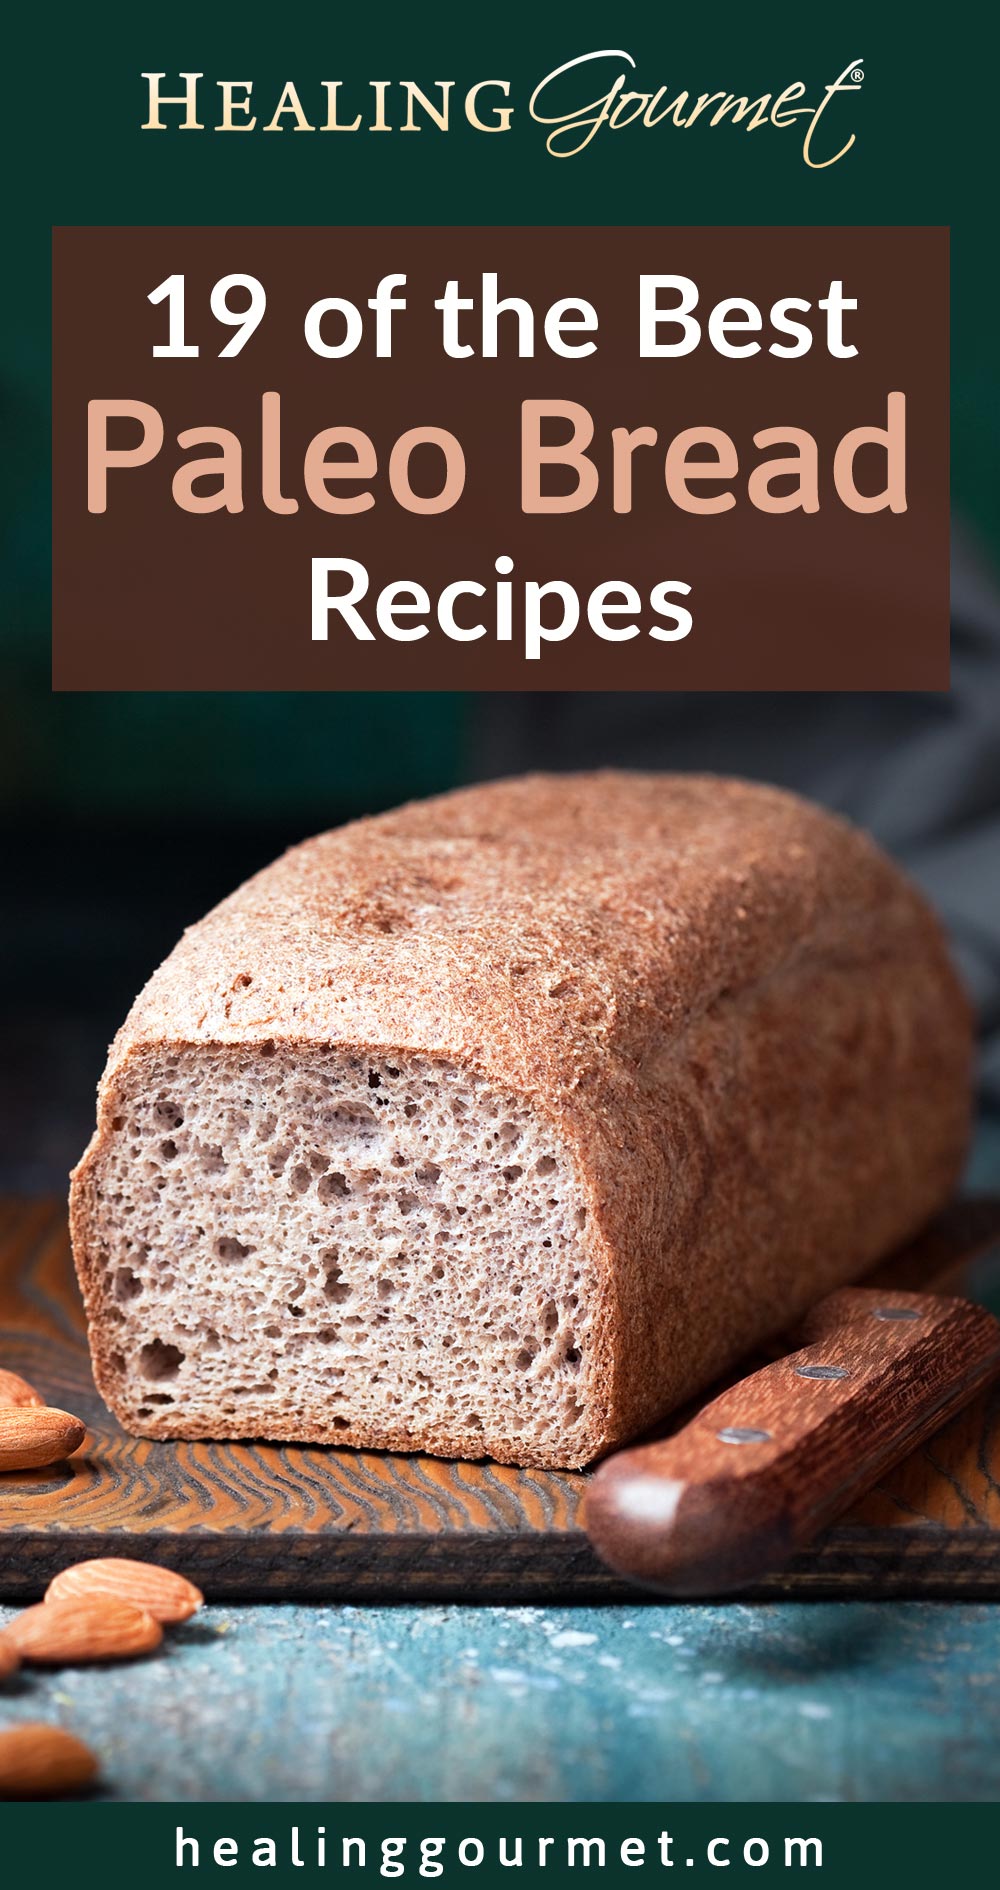 19 of the Best Paleo Bread Recipes